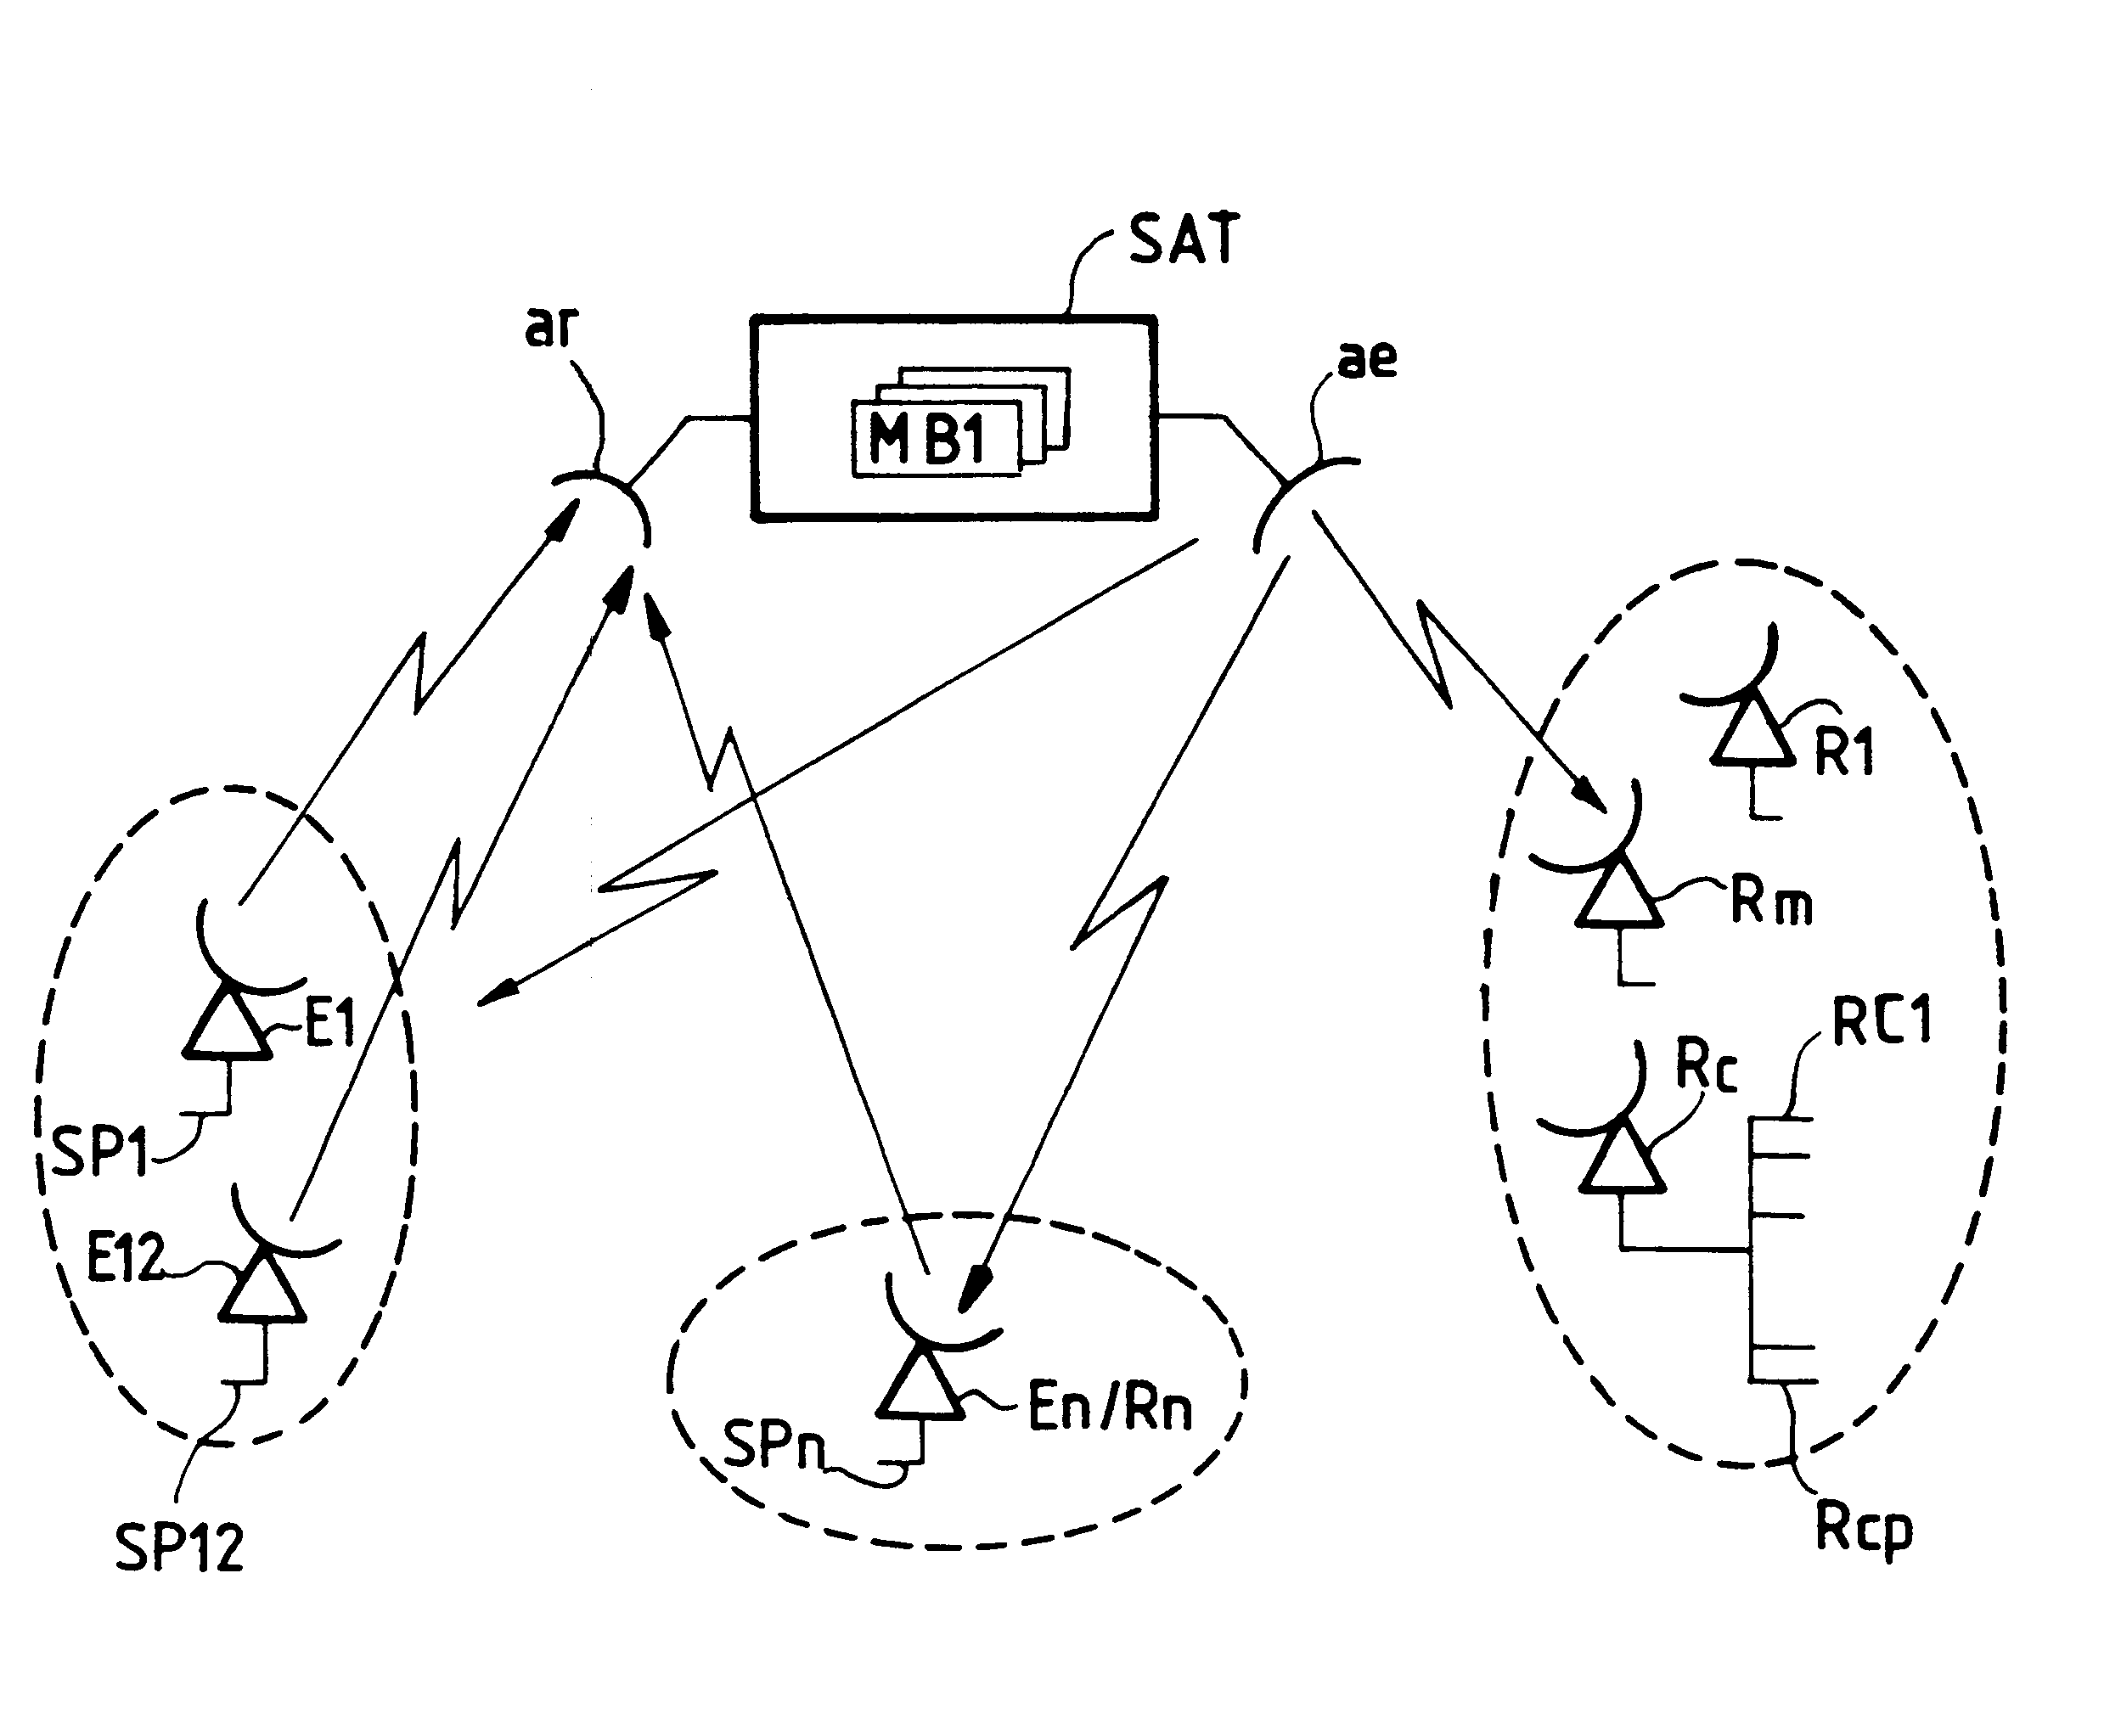 Satellite communication system for broadcasting audio-visual programs and multimedia data